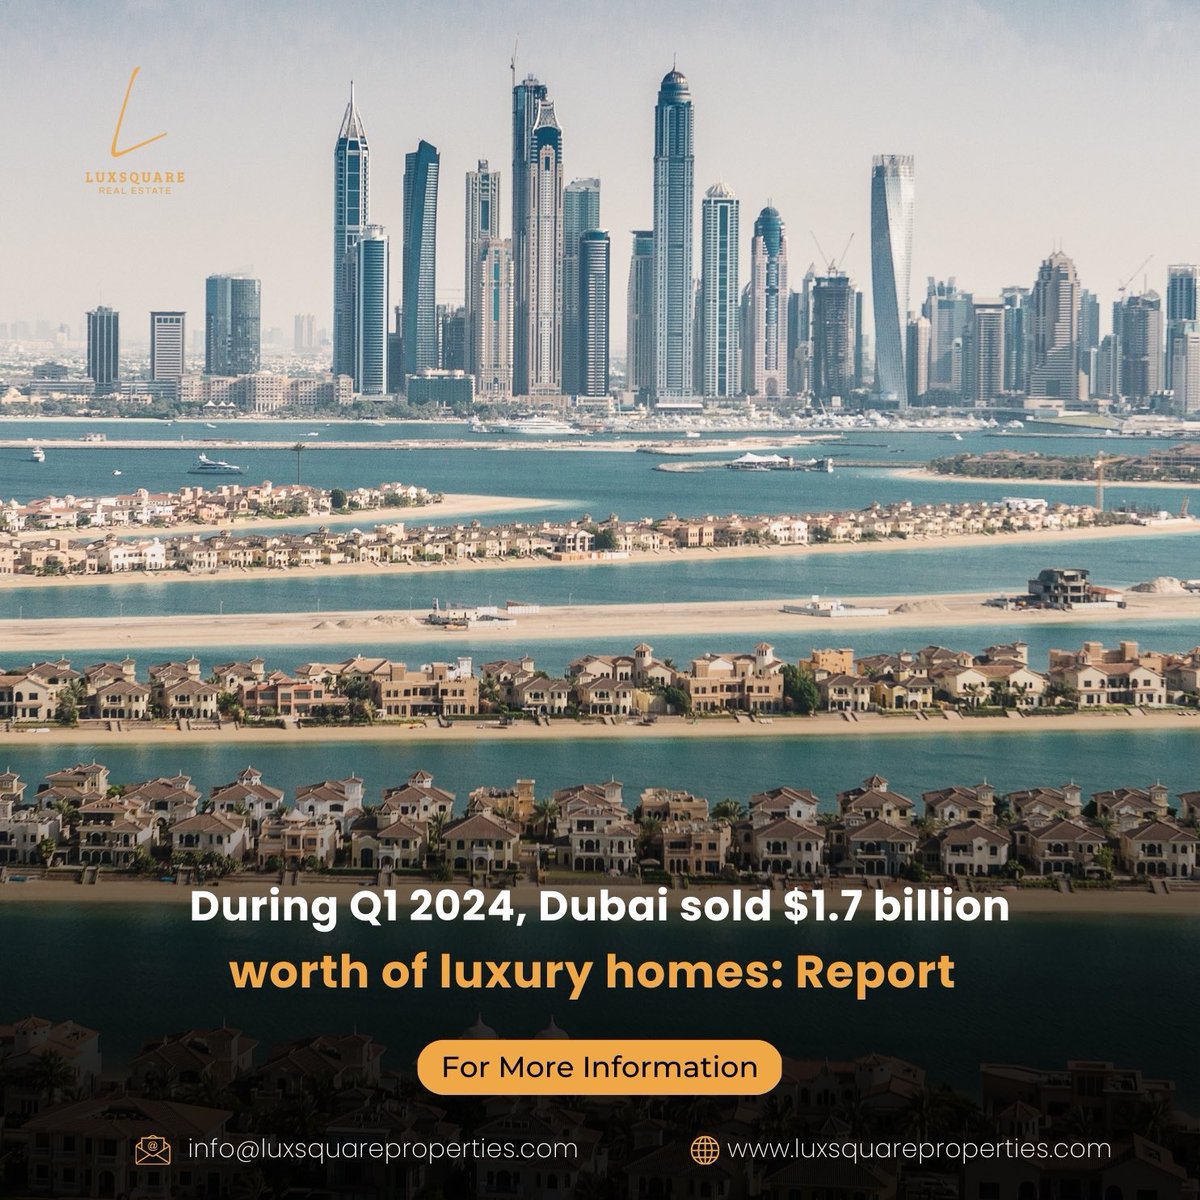 According to reports 105 properties valued at more than $10 million were sold in Dubai in the first three months of this year, a 19% increase from Q1 2023.
Follow for more updates!
#realestatedubai #dubai #dubairealestate #uae #mydubai #dubailife #emirates #dubaimarina